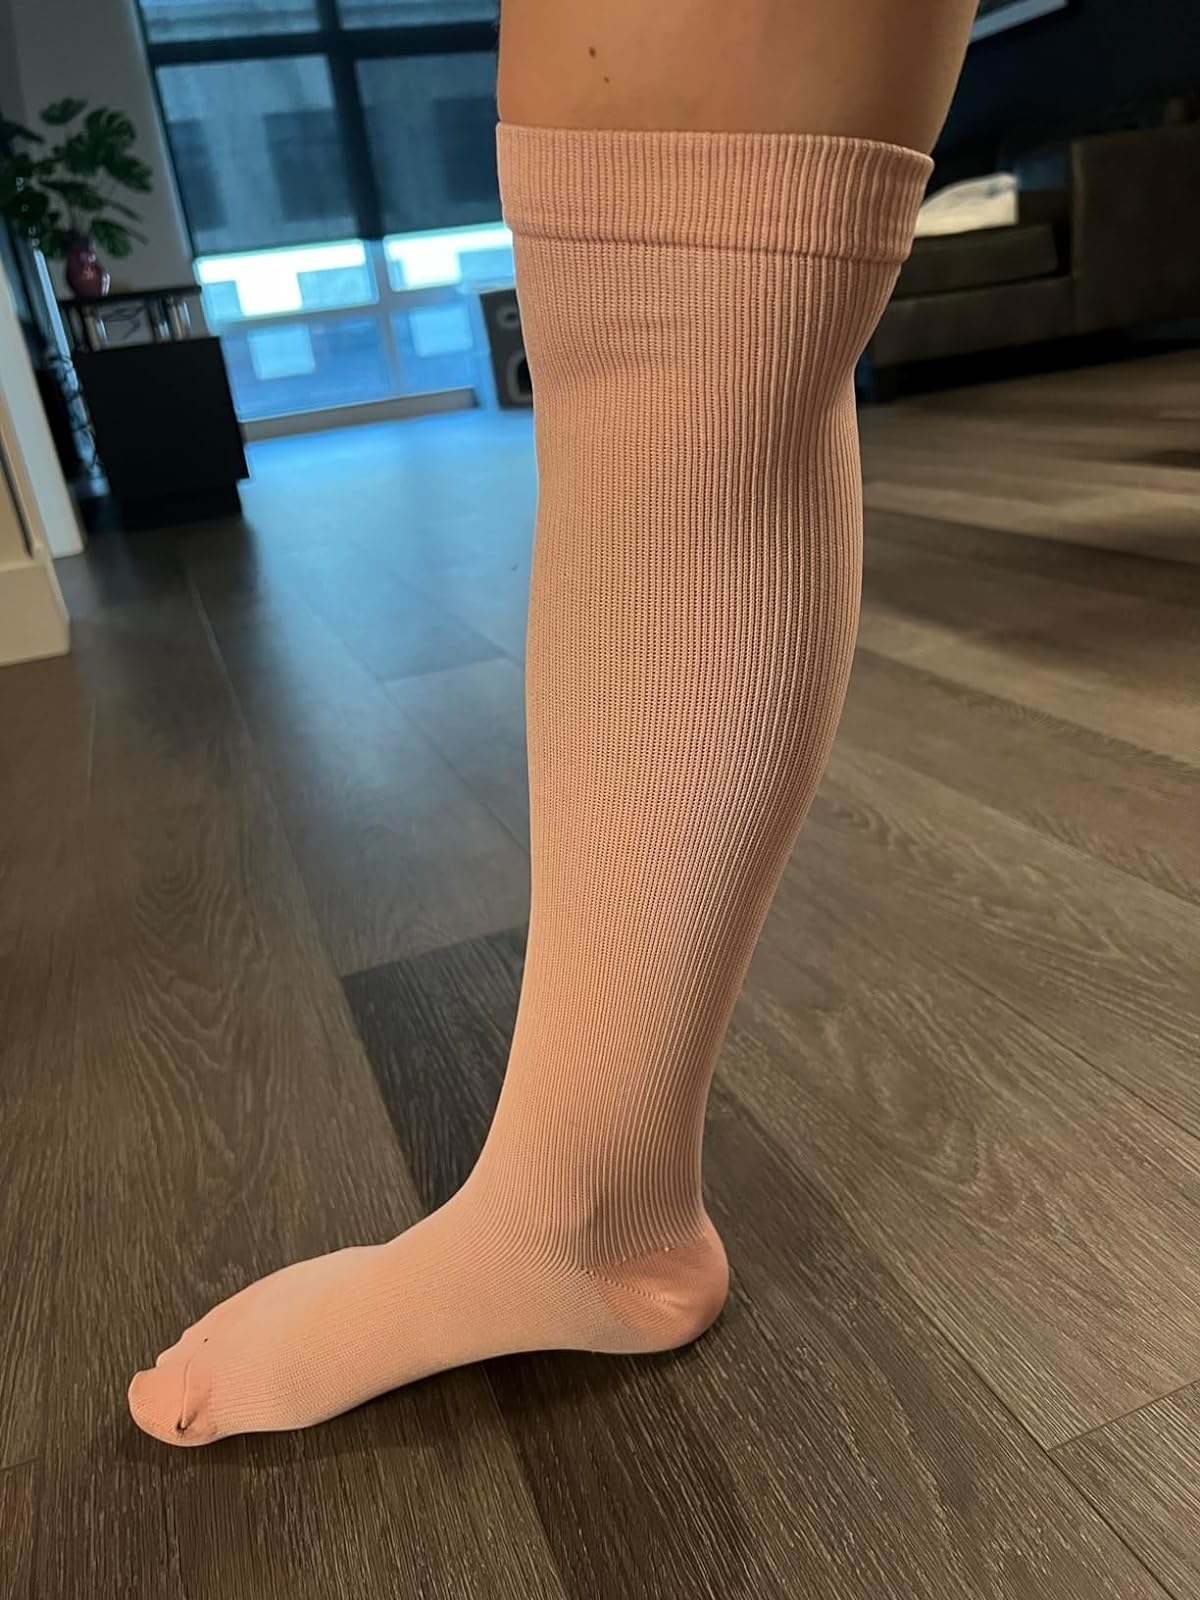 Close-up of a person wearing a single beige knee-high compression sock, standing on a wood floor